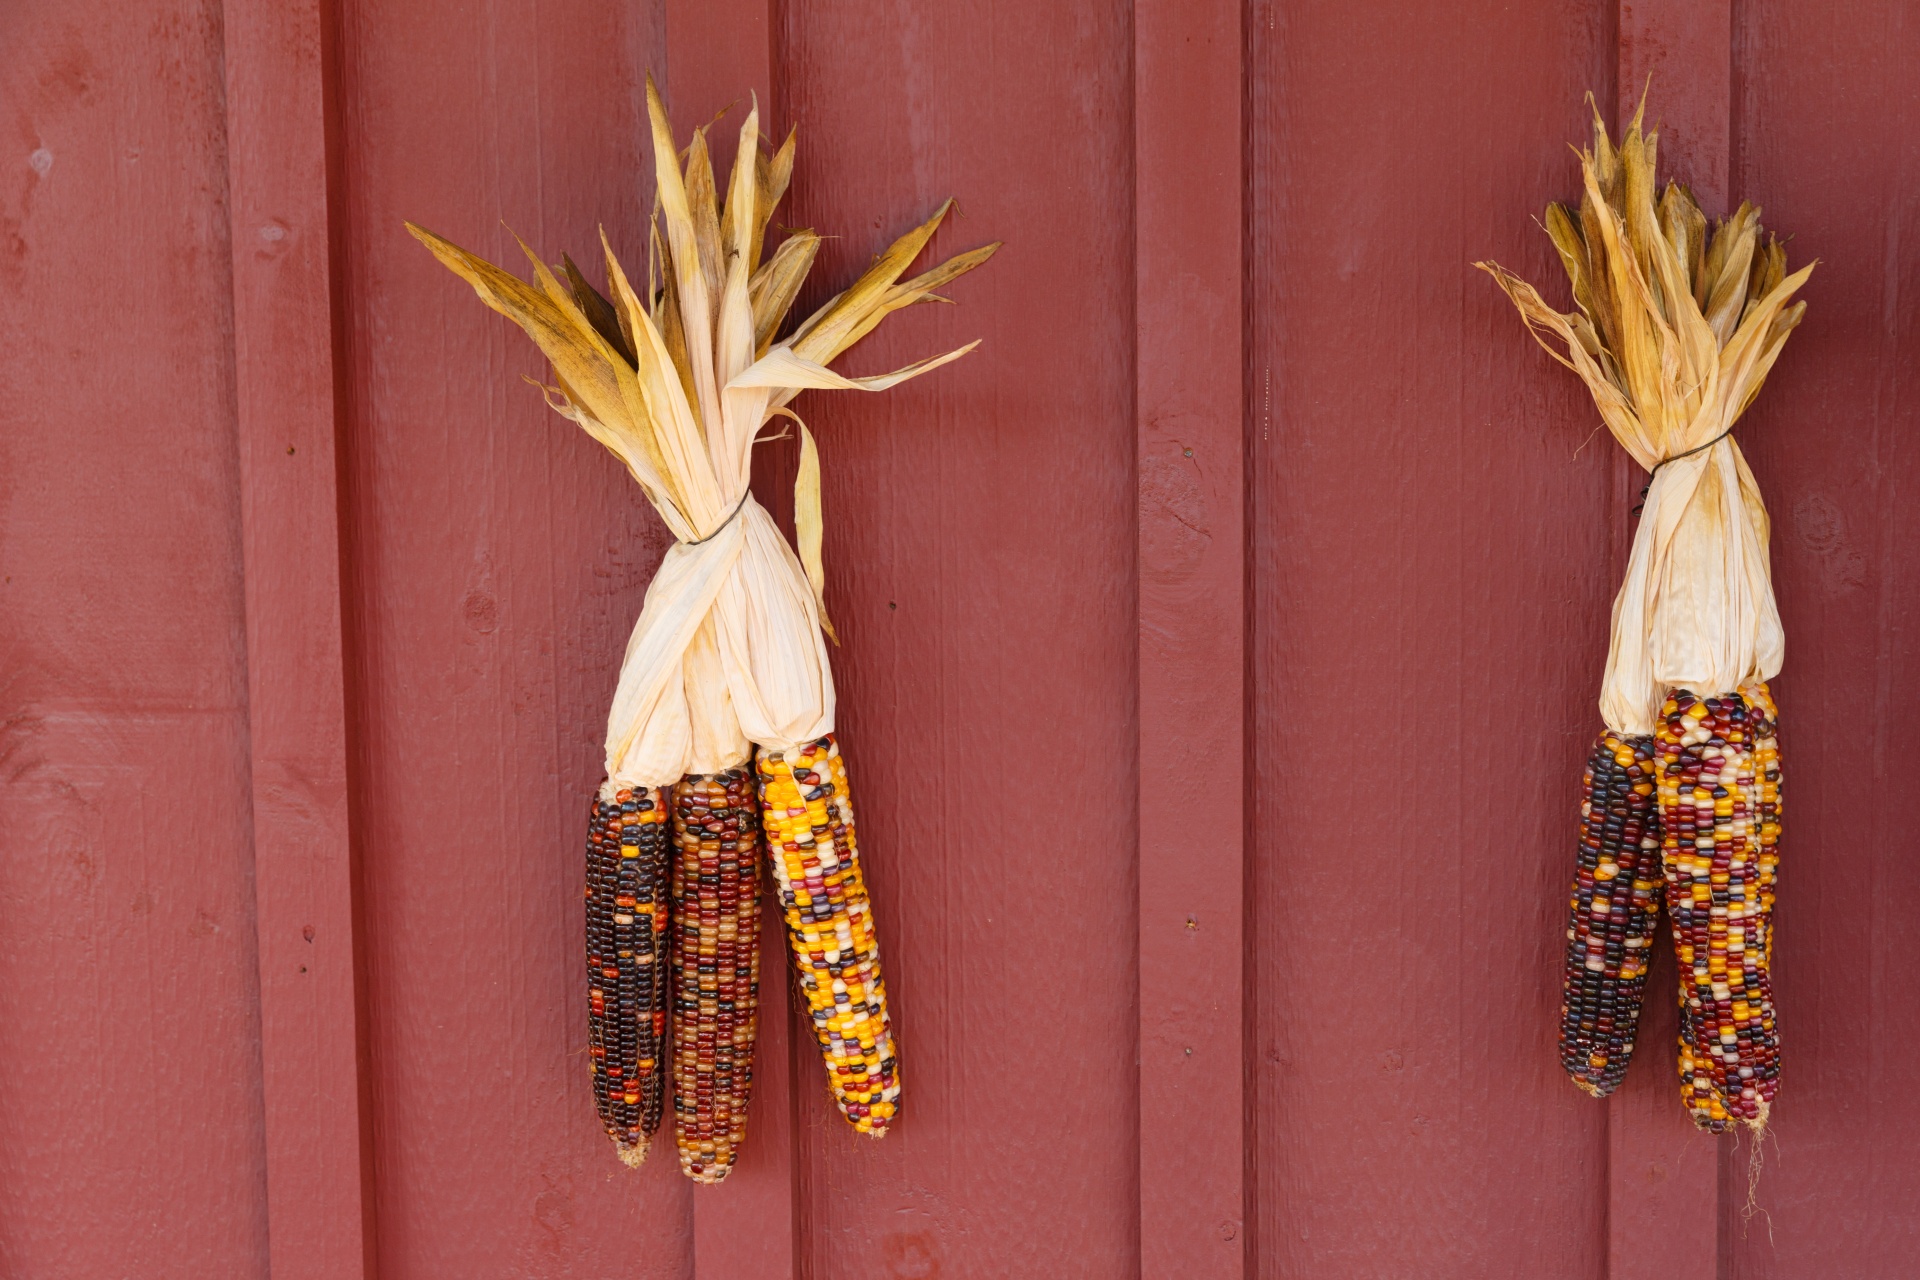 Indian corn hanging on the wooden wall